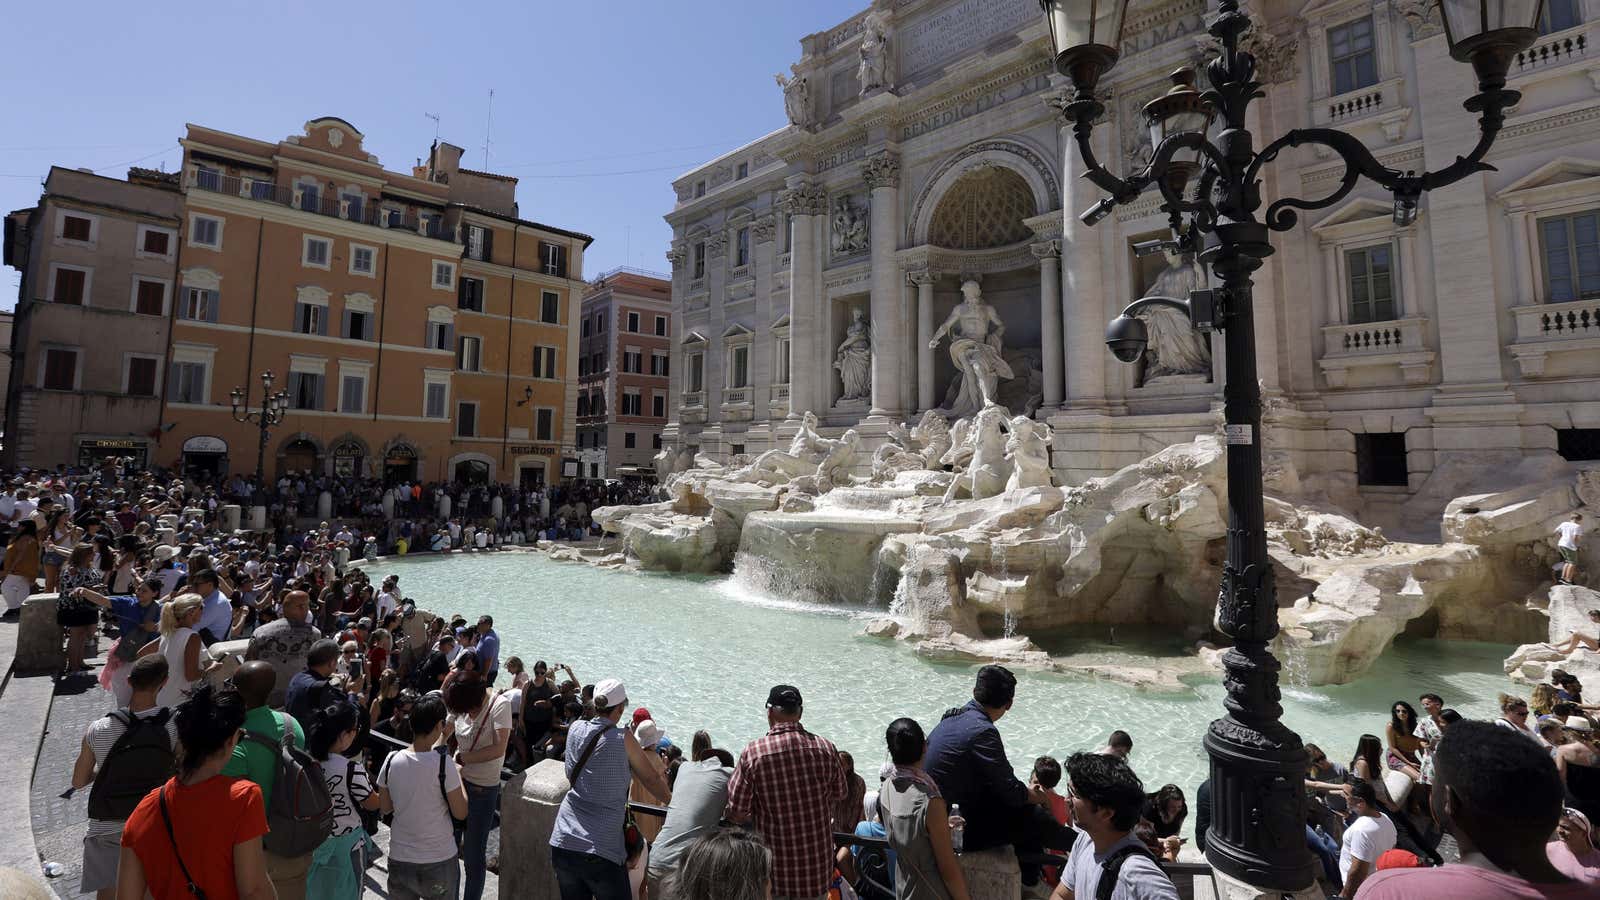 Trevi Fountain? Yeah, people have heard of it.